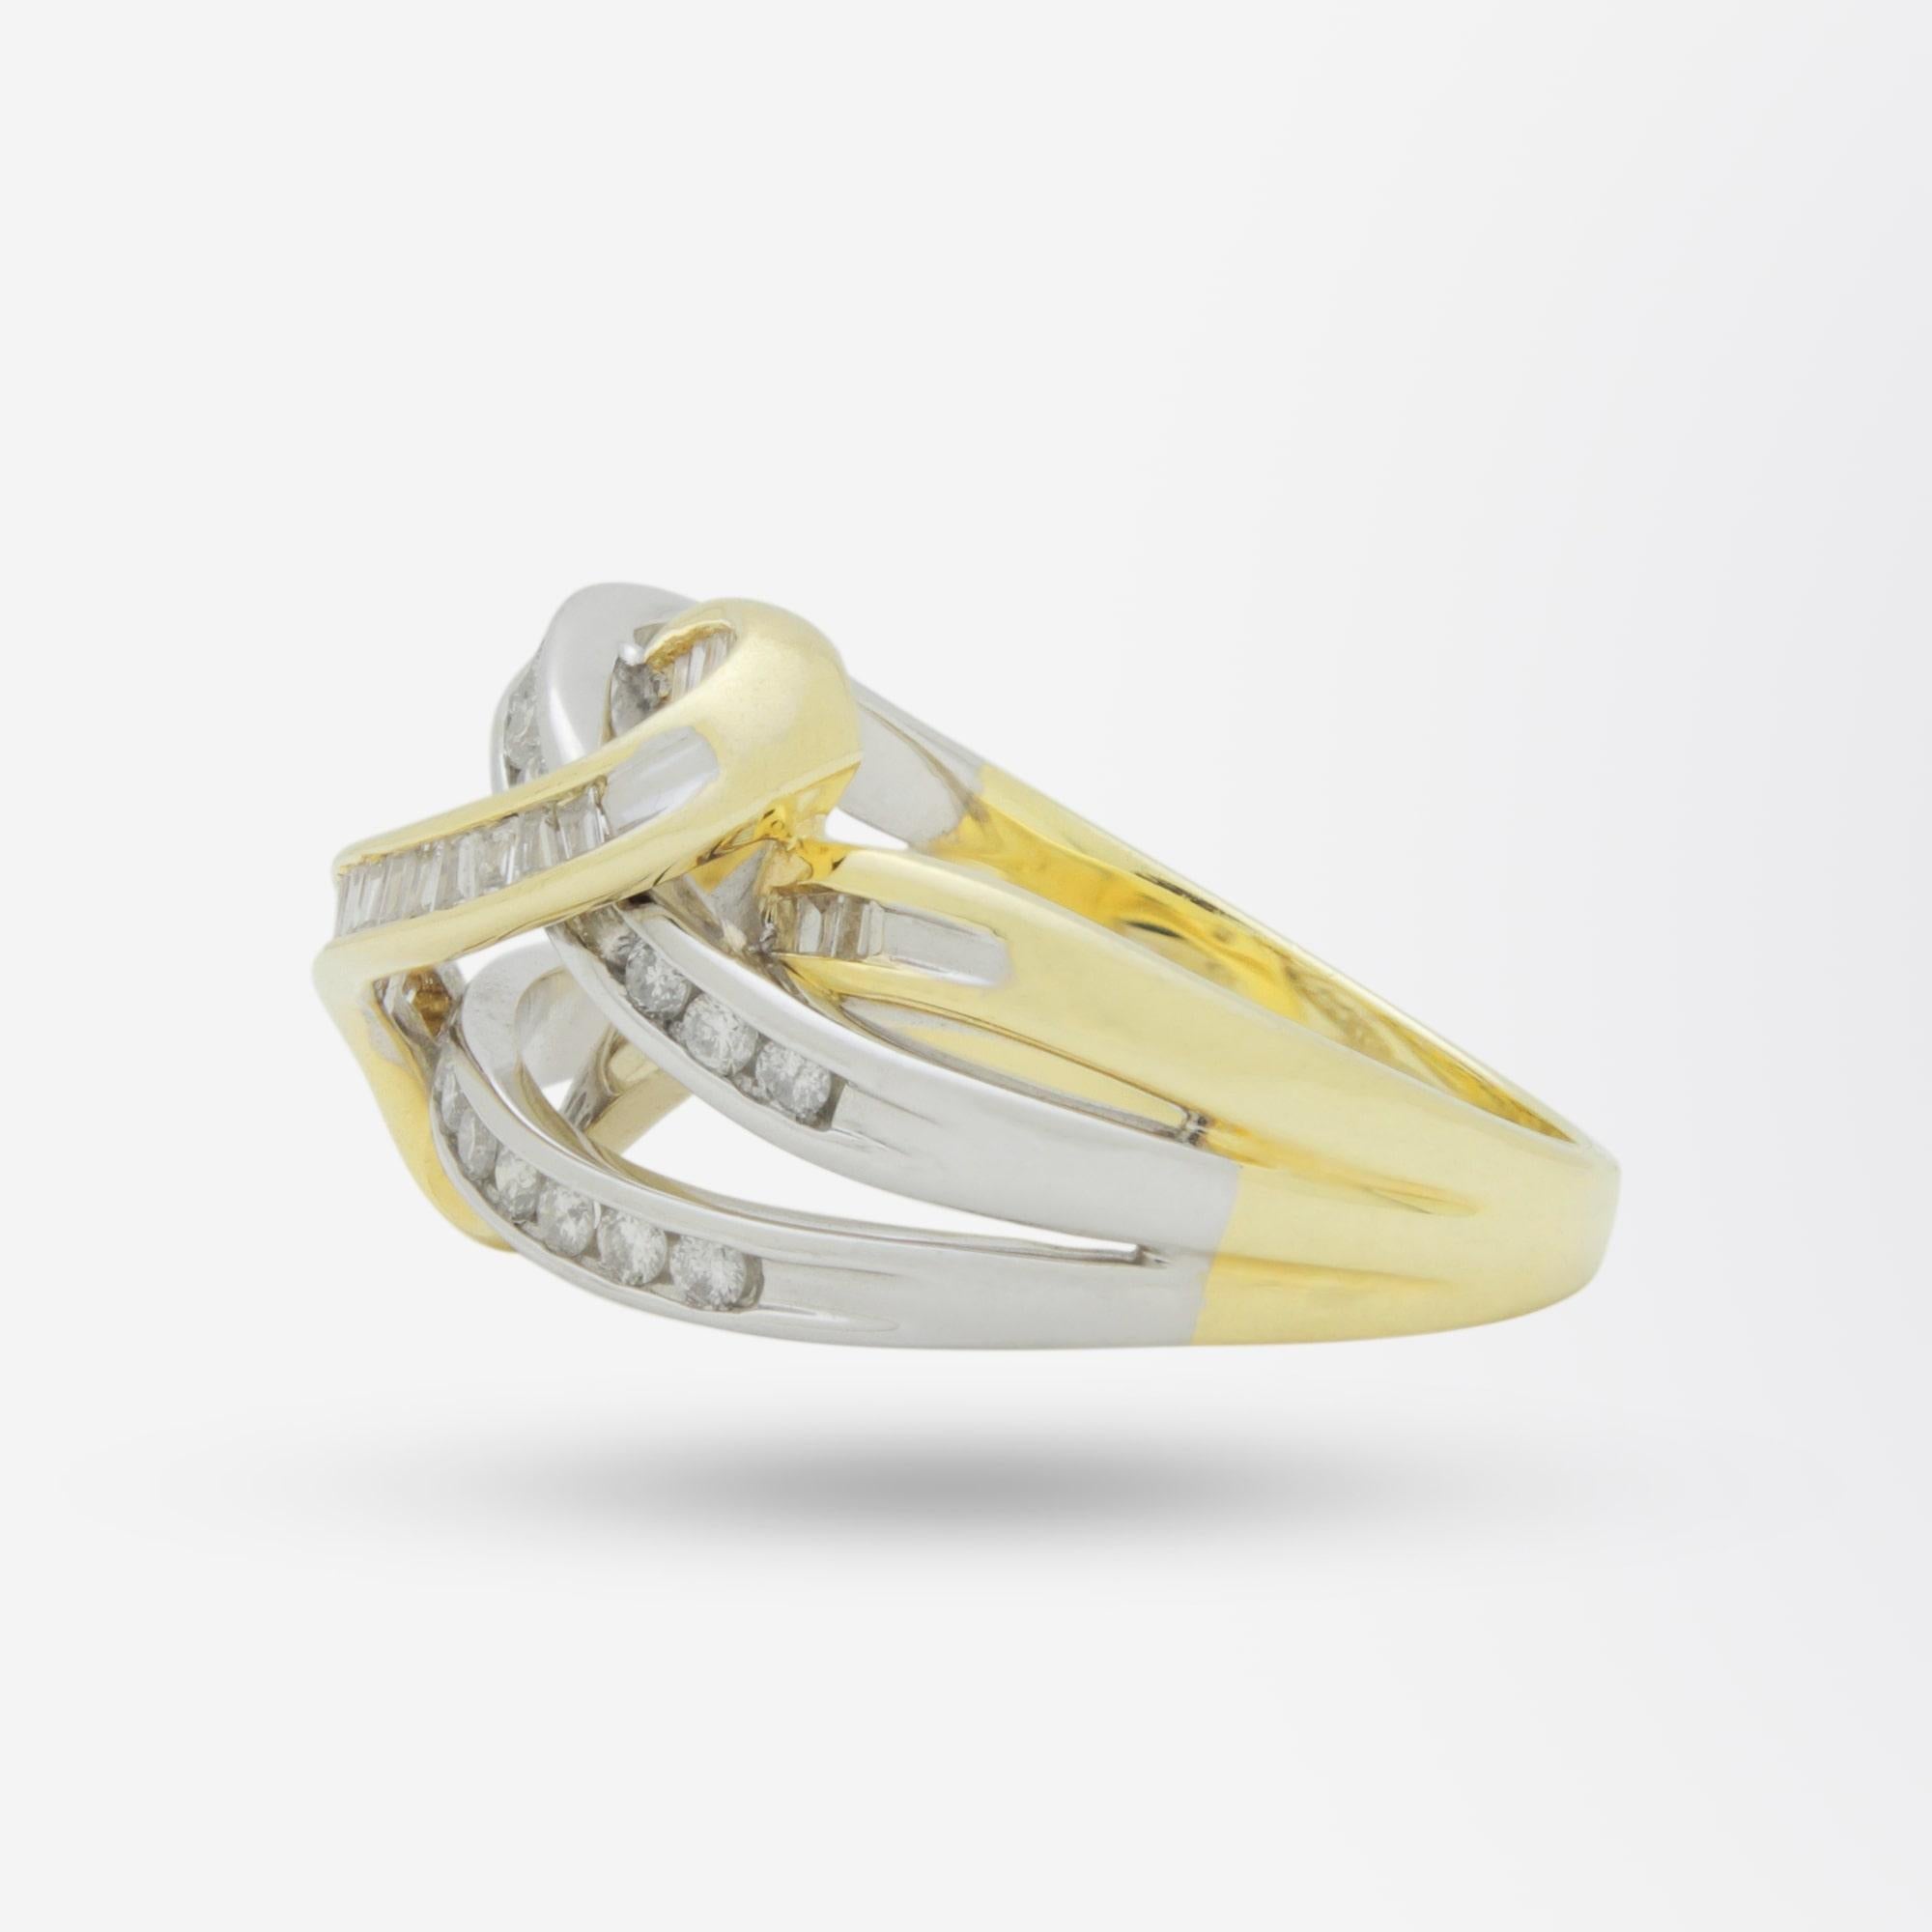 An attractive ring crafted from 14 karat yellow and white gold set with diamonds. The interlocking design sees bands of white and yellow gold set with brilliant and tapered baguette cut diamonds sweep around one another in a ribbon like effect. The